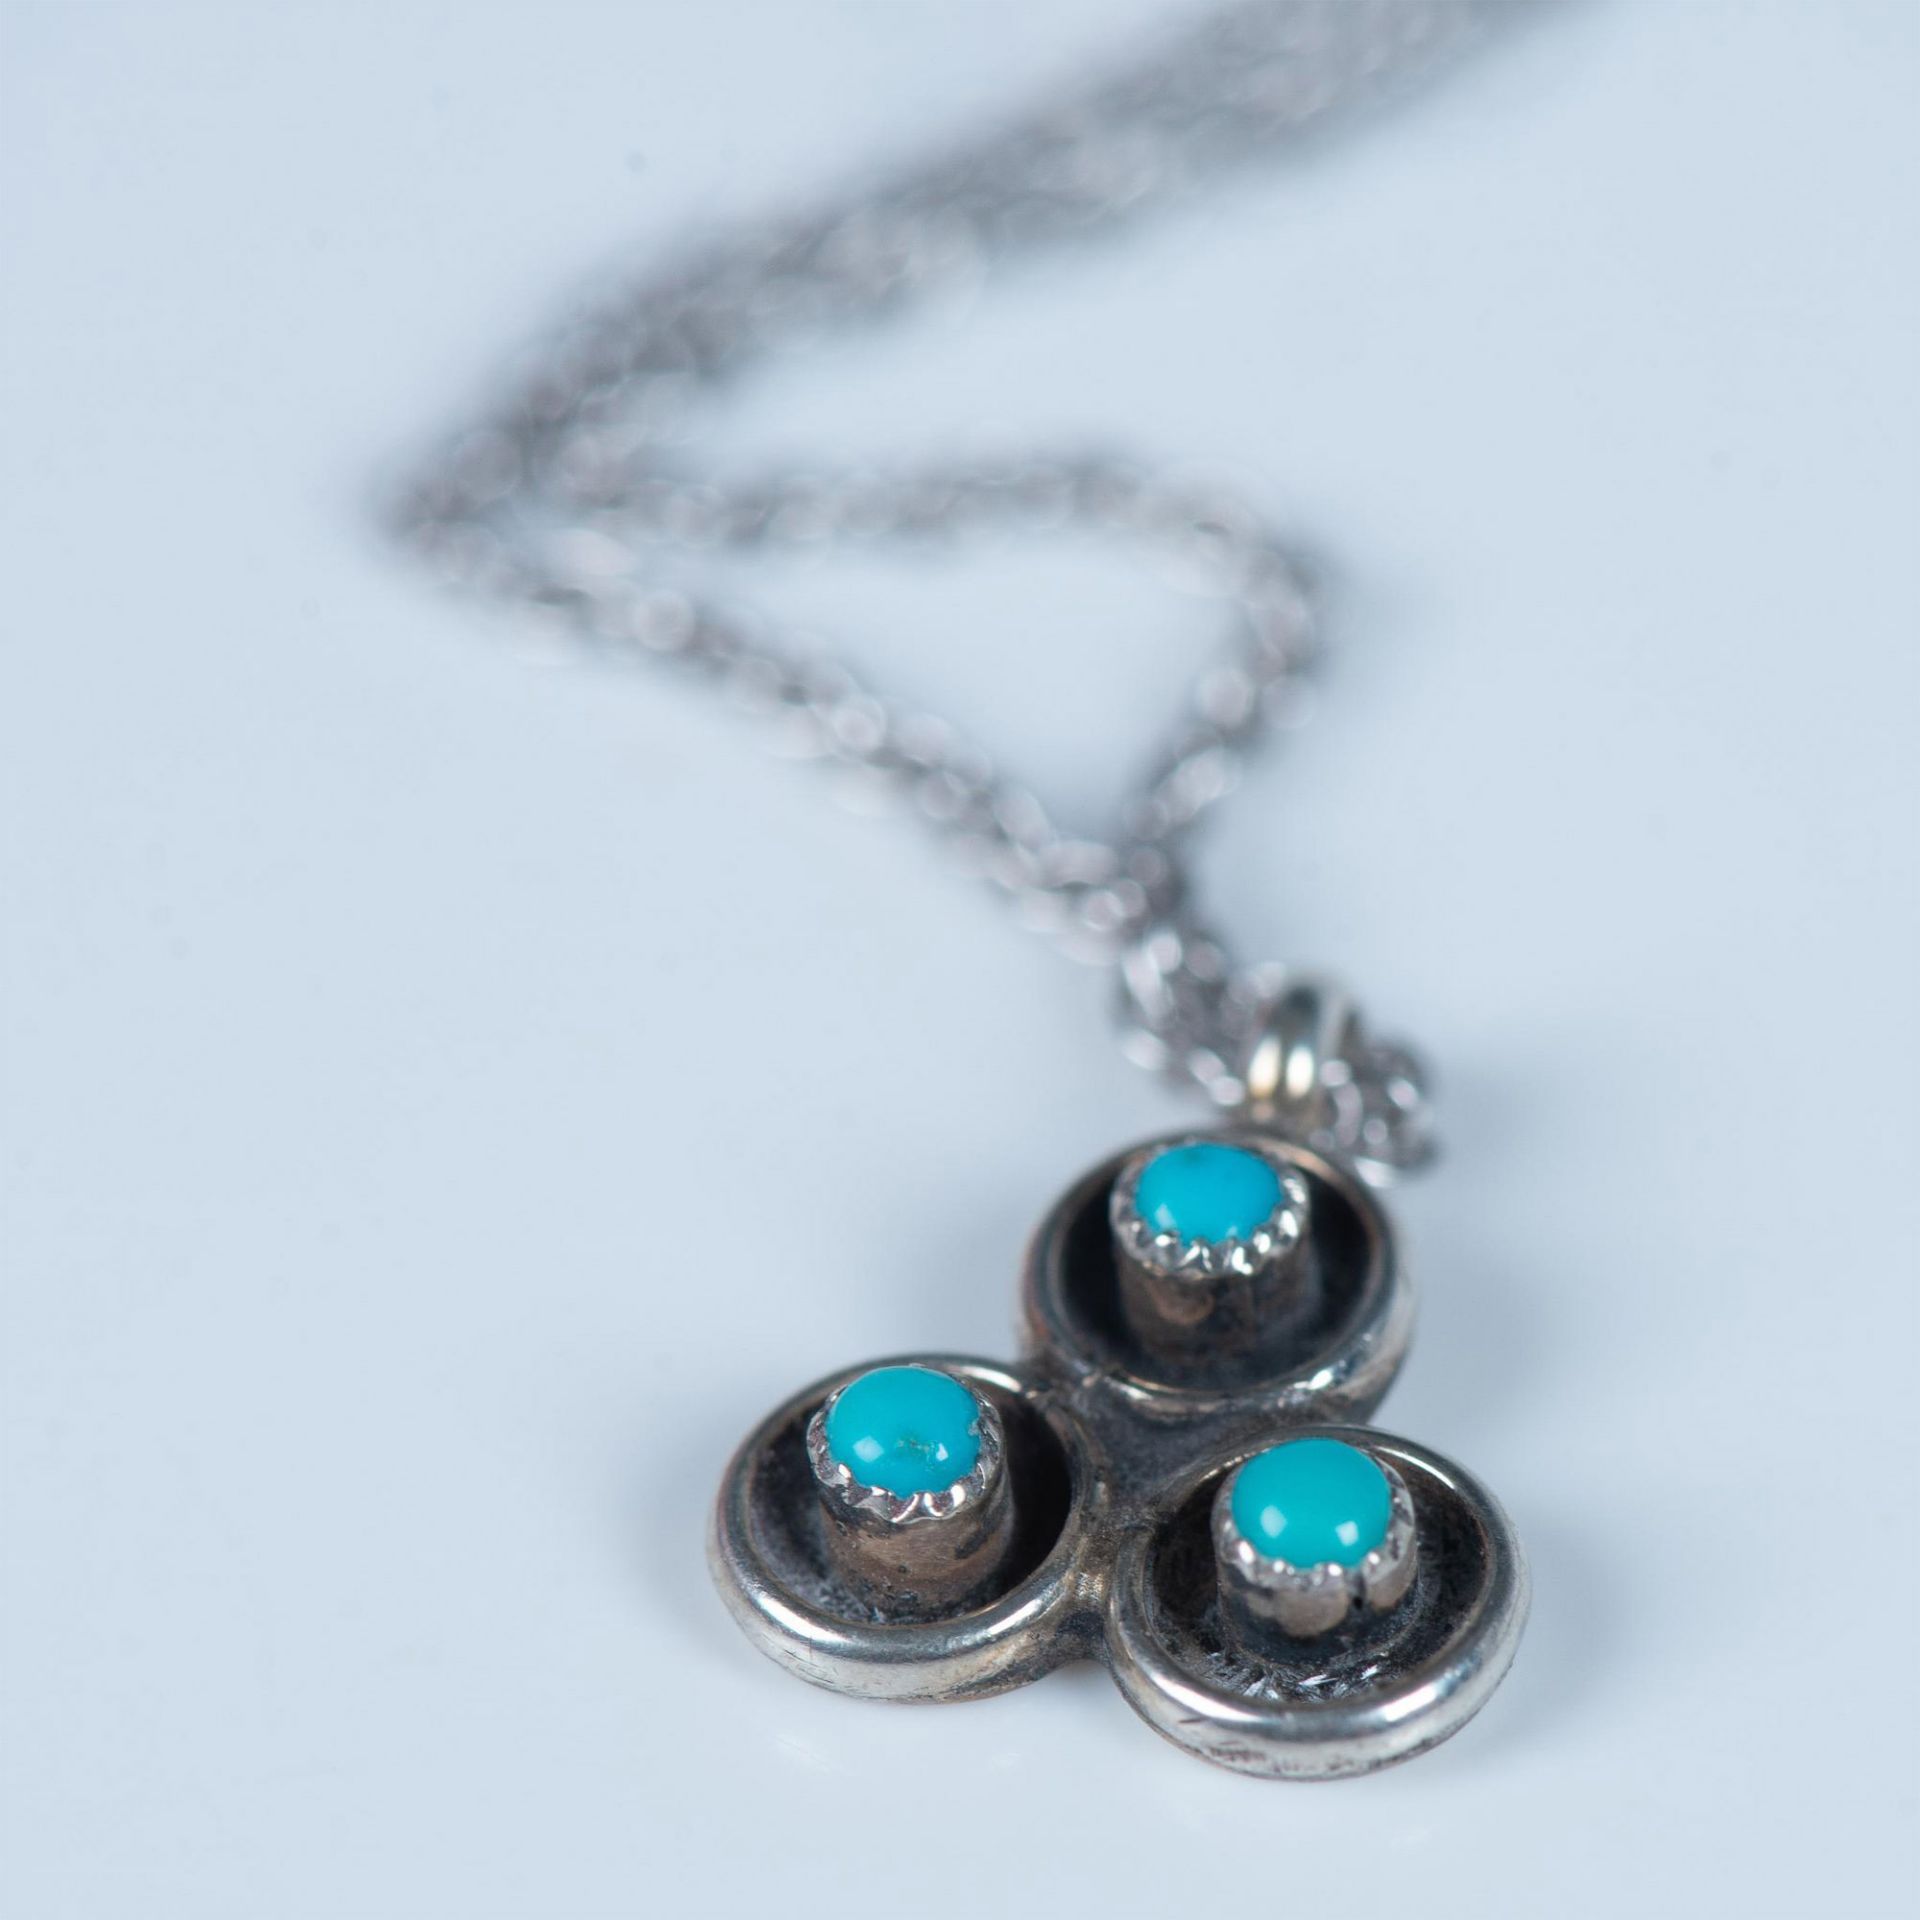 Cute Small Sterling Silver & Turquoise Necklace - Image 5 of 5